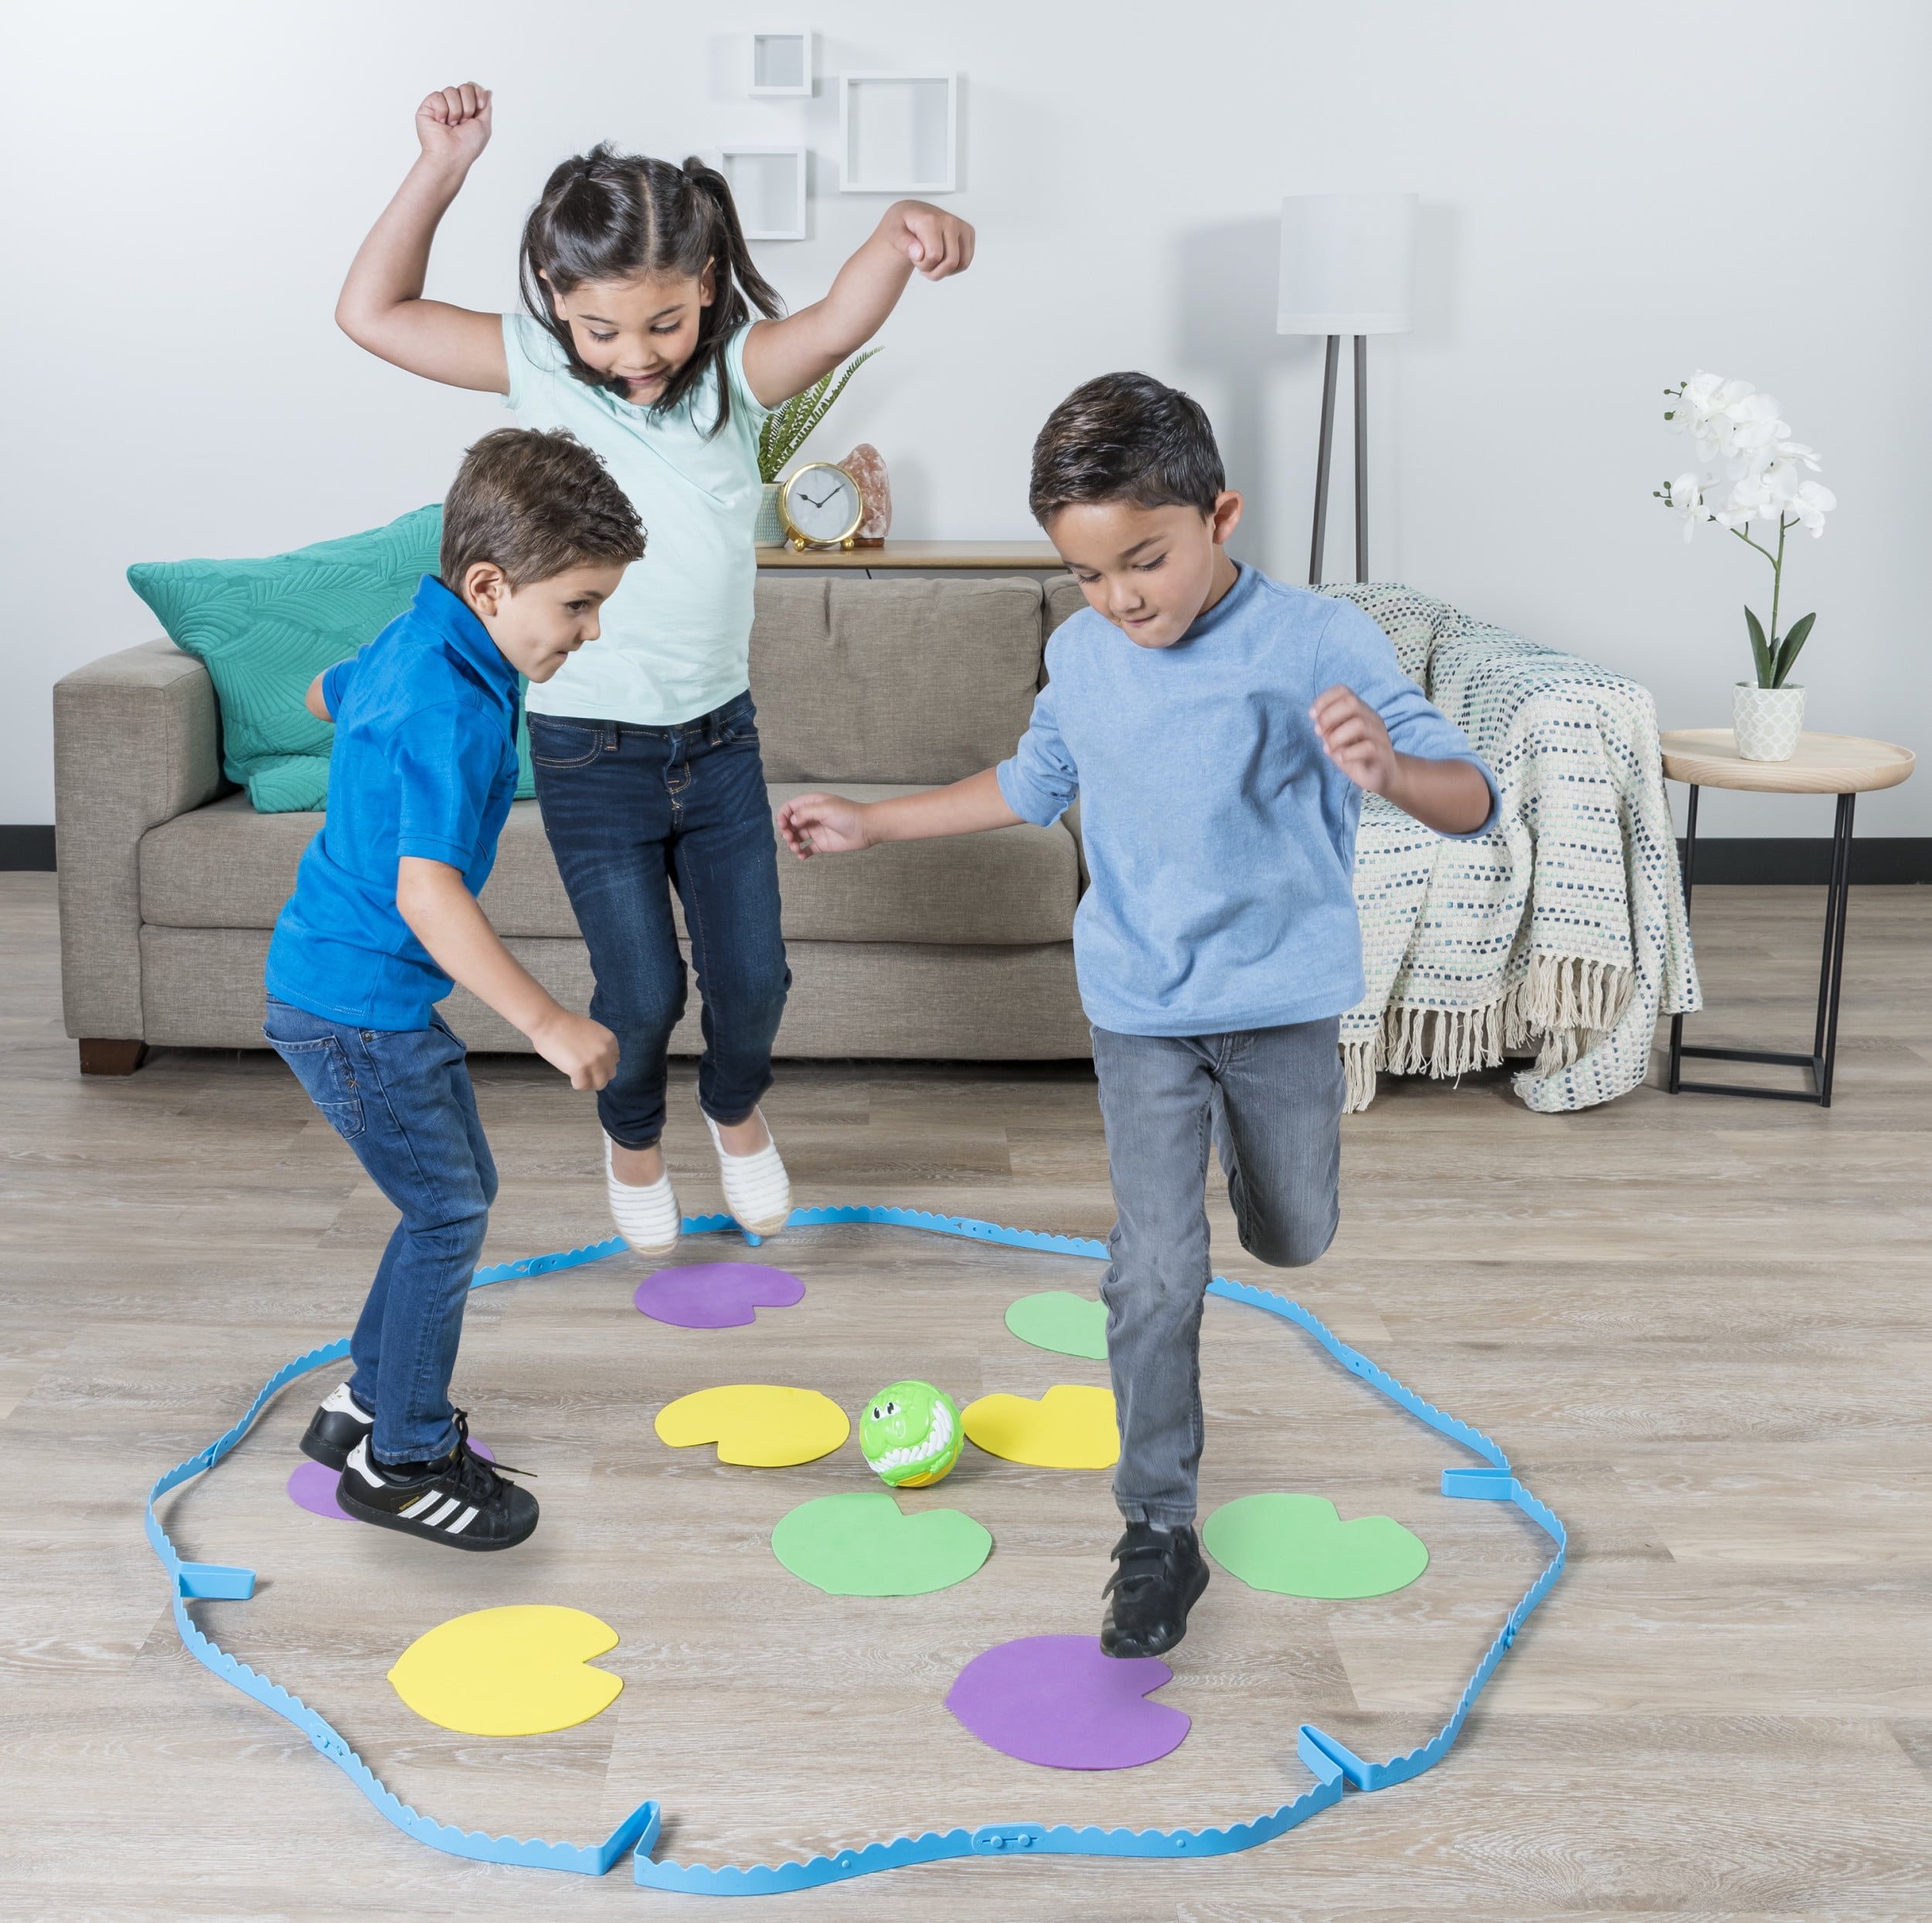 Croc ‘n’ Roll Fun Family Game for Kids Aged 3 and Up 